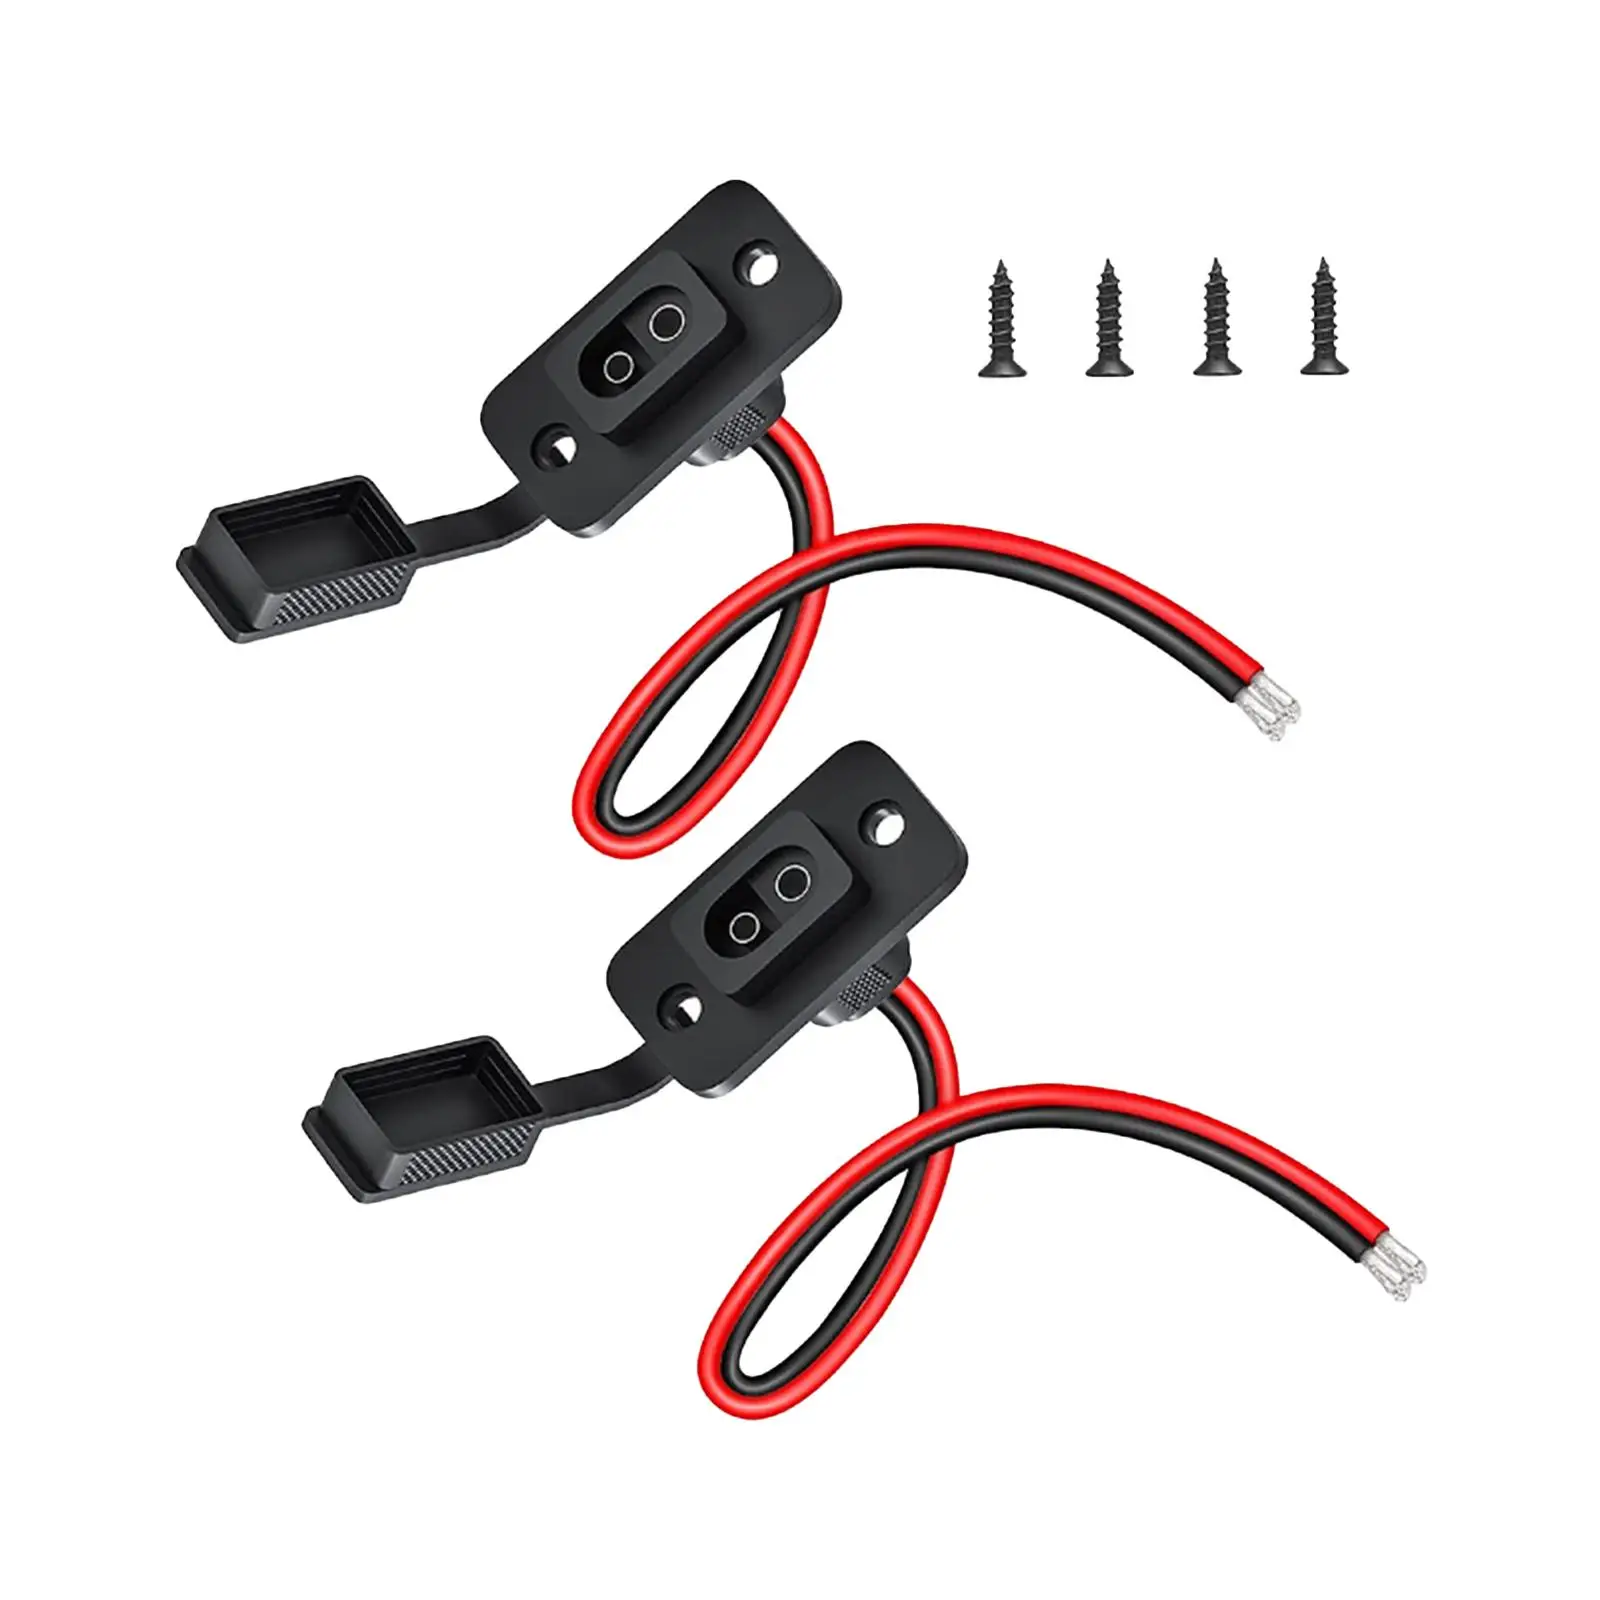 2x SAE Socket Weatherproof Motorcycle 12AWG SAE Connector Quick Connect Disconnect Solar Panel RV Boats Accessory Battery Cables